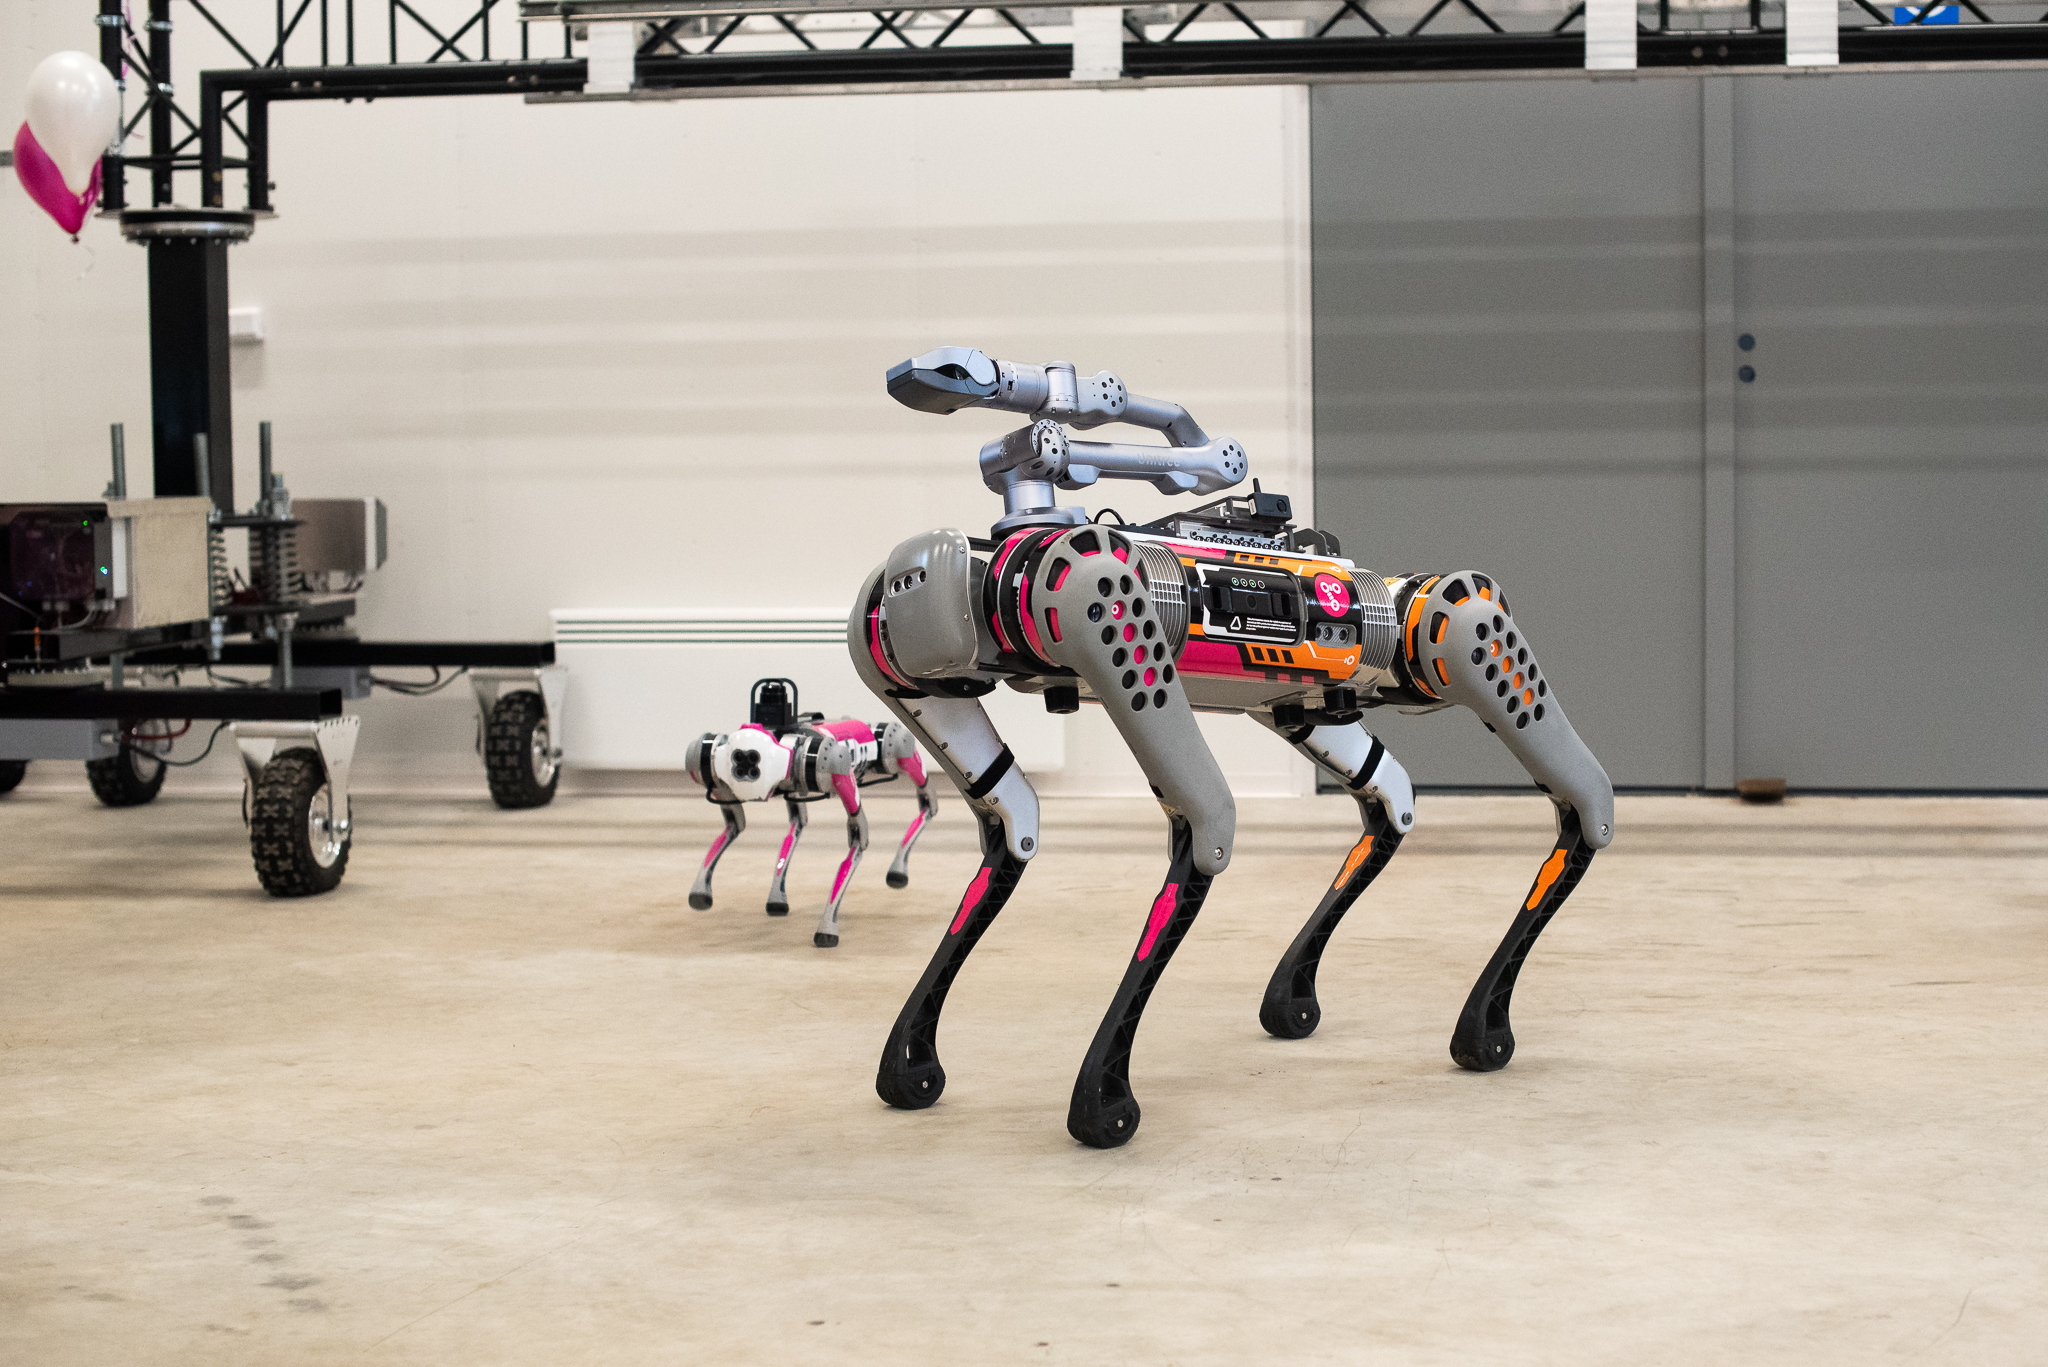 A large robotic dog with a robotic arm attached to its back. A small robot dog in the background.